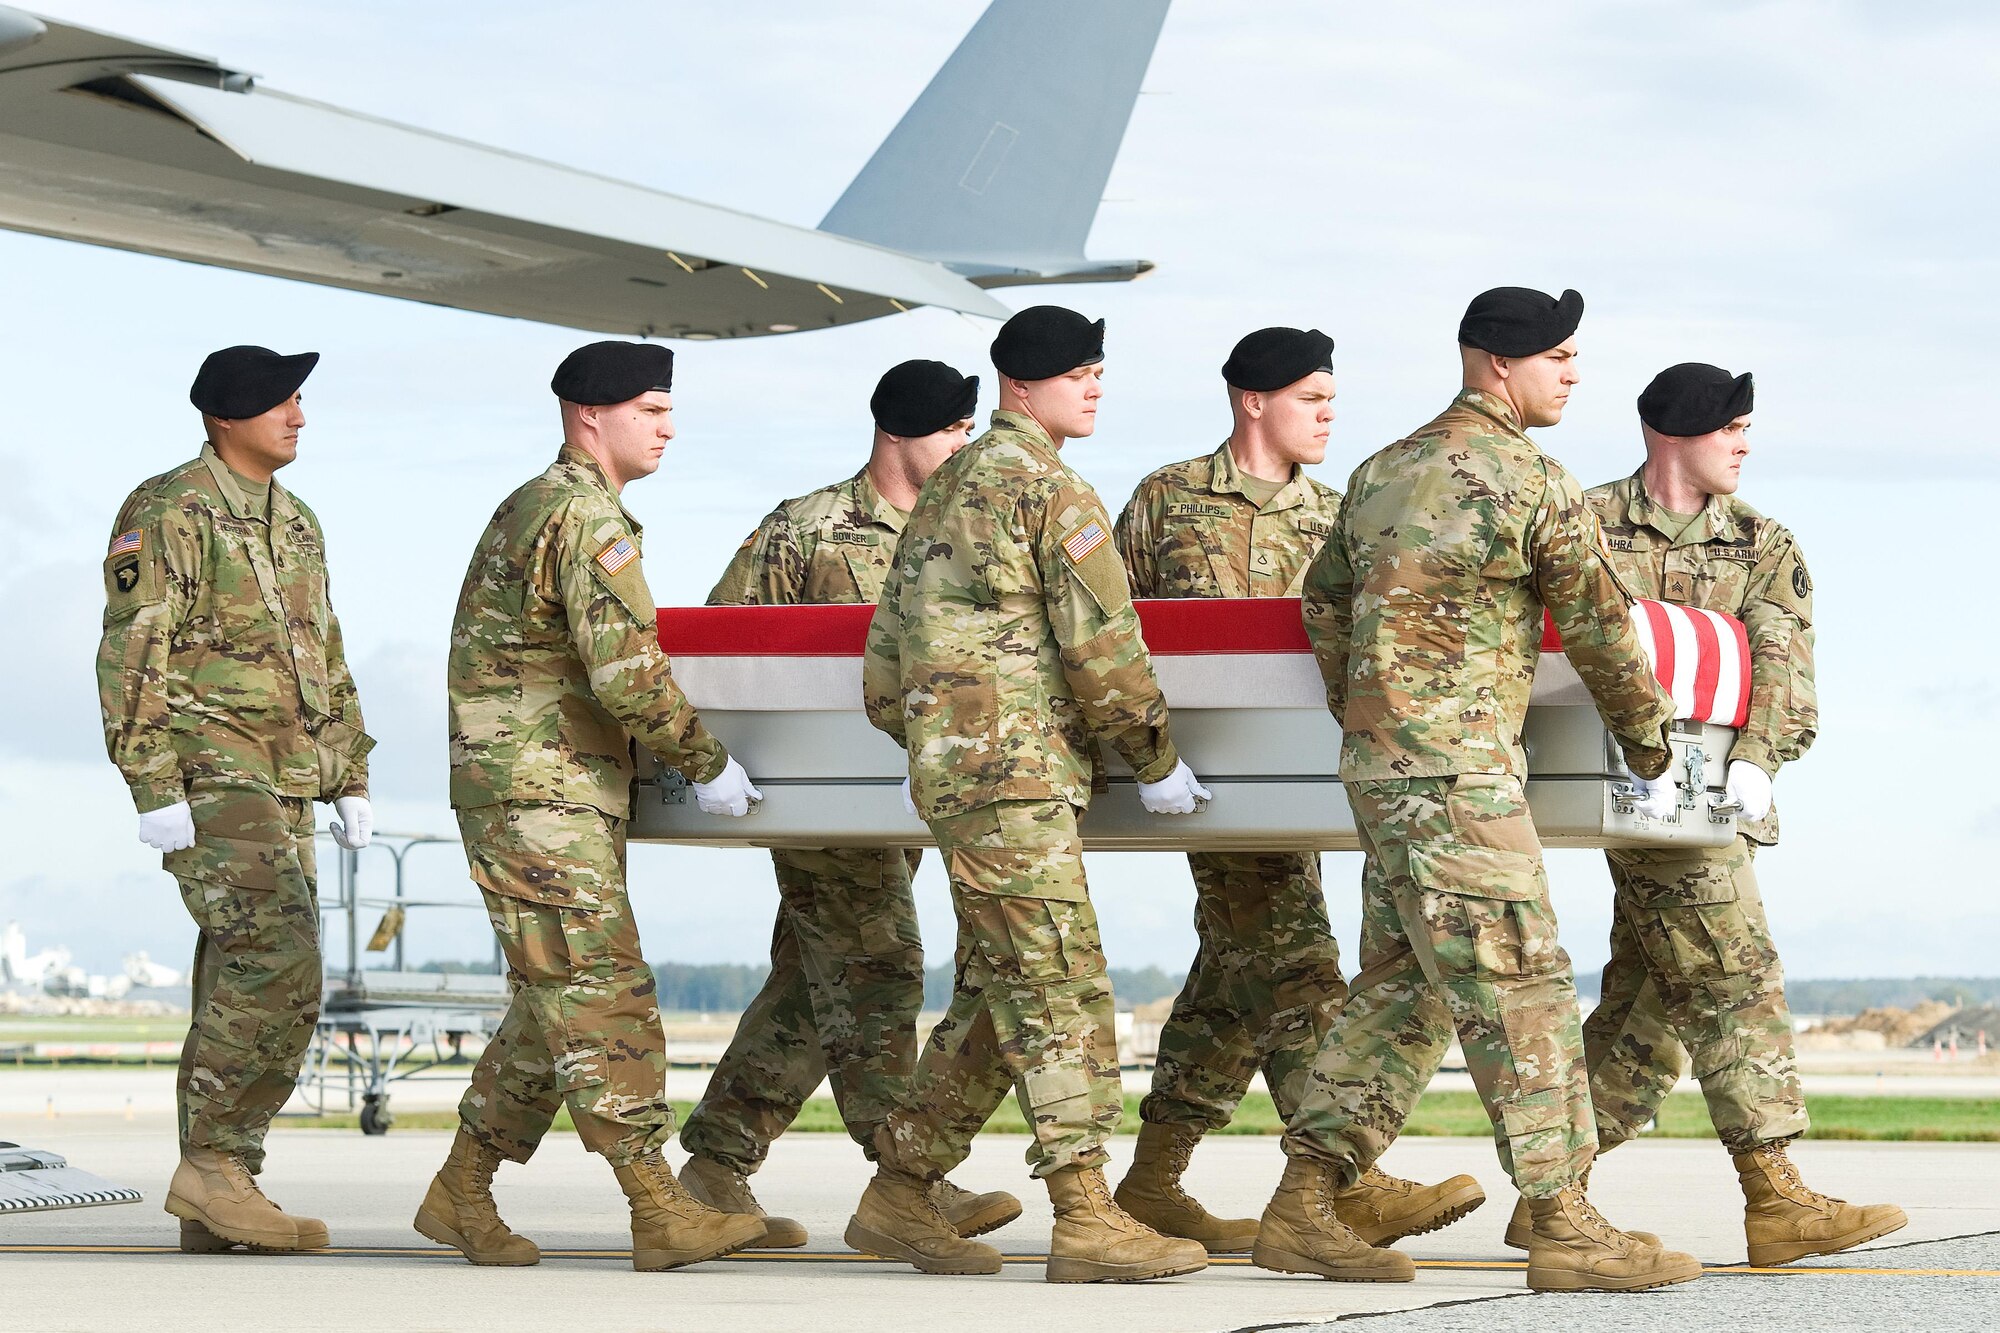 A U.S. Army carry team transfers the remains of Army Sgt. Douglas J. Riney, of Fairview, Ill., during a dignified transfer Oct. 21, 2016, at Dover Air Force Base, Del. Riney was assigned to Support Squadron, 3rd Cavalry Regiment, 3rd Cavalry Division, Fort Hood, Texas. (U.S. Air Force photo by Roland Balik)